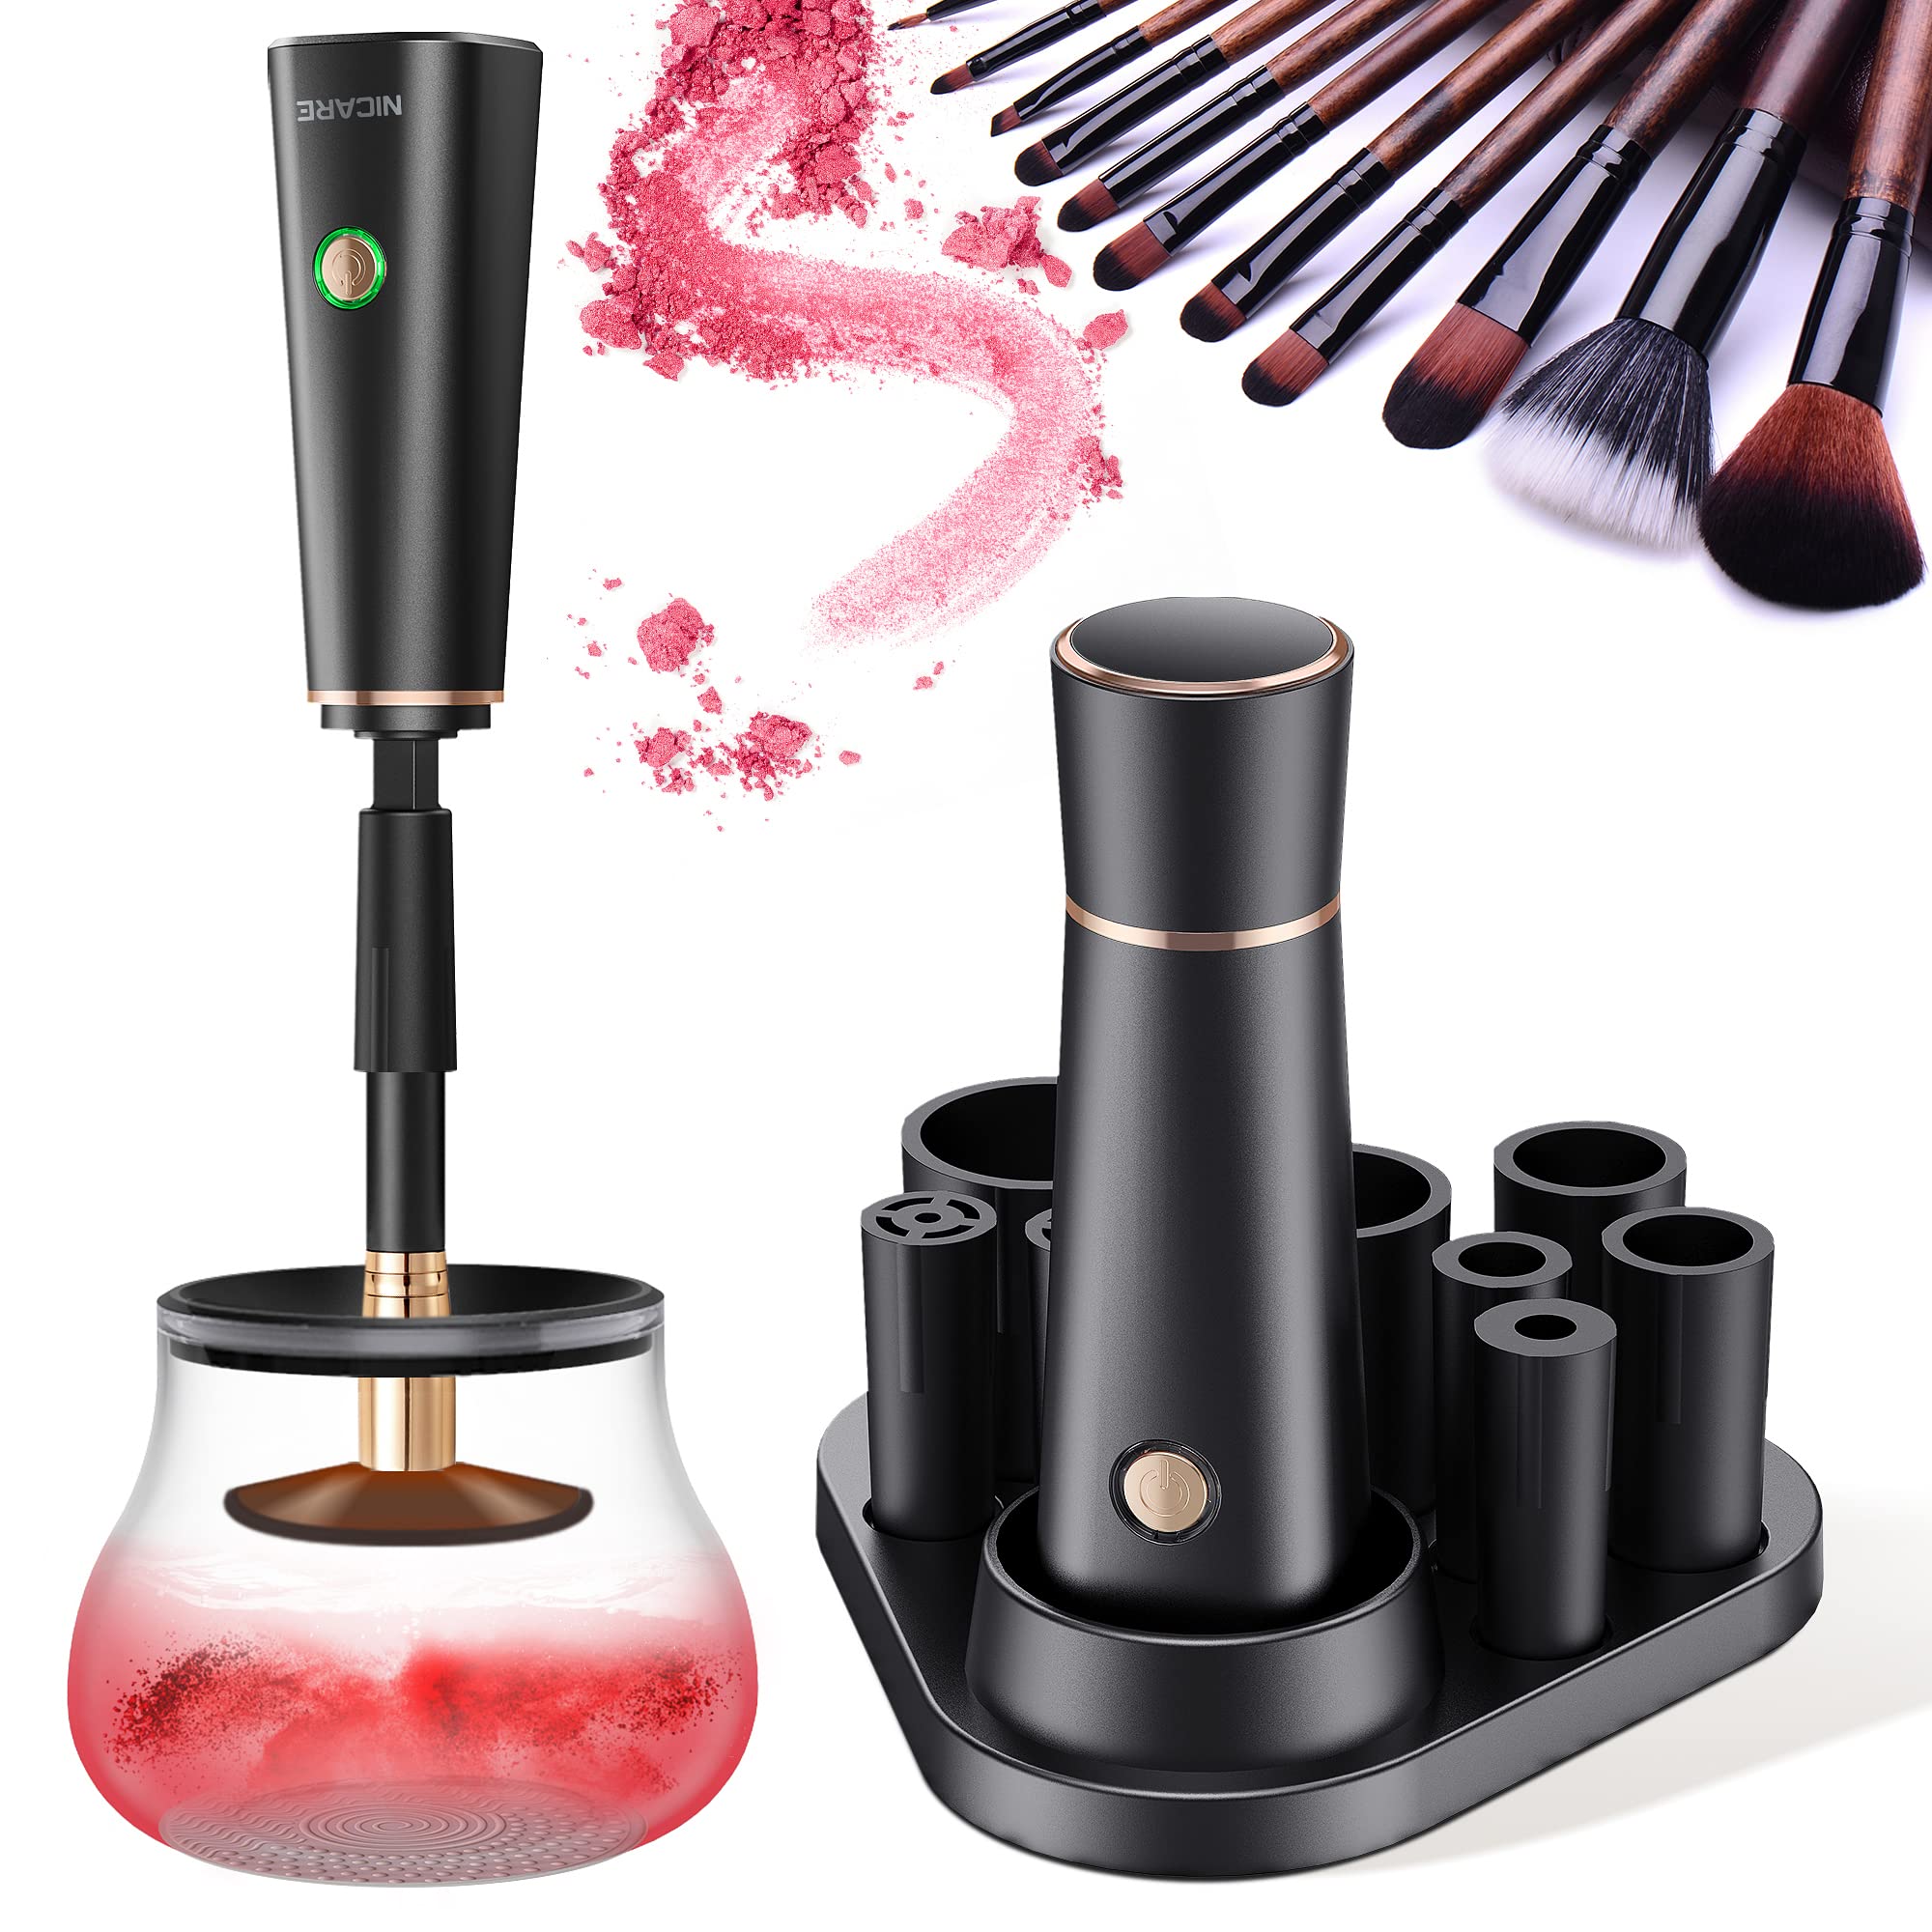 NICARE Makeup Brush Cleaner and Dryer Machine